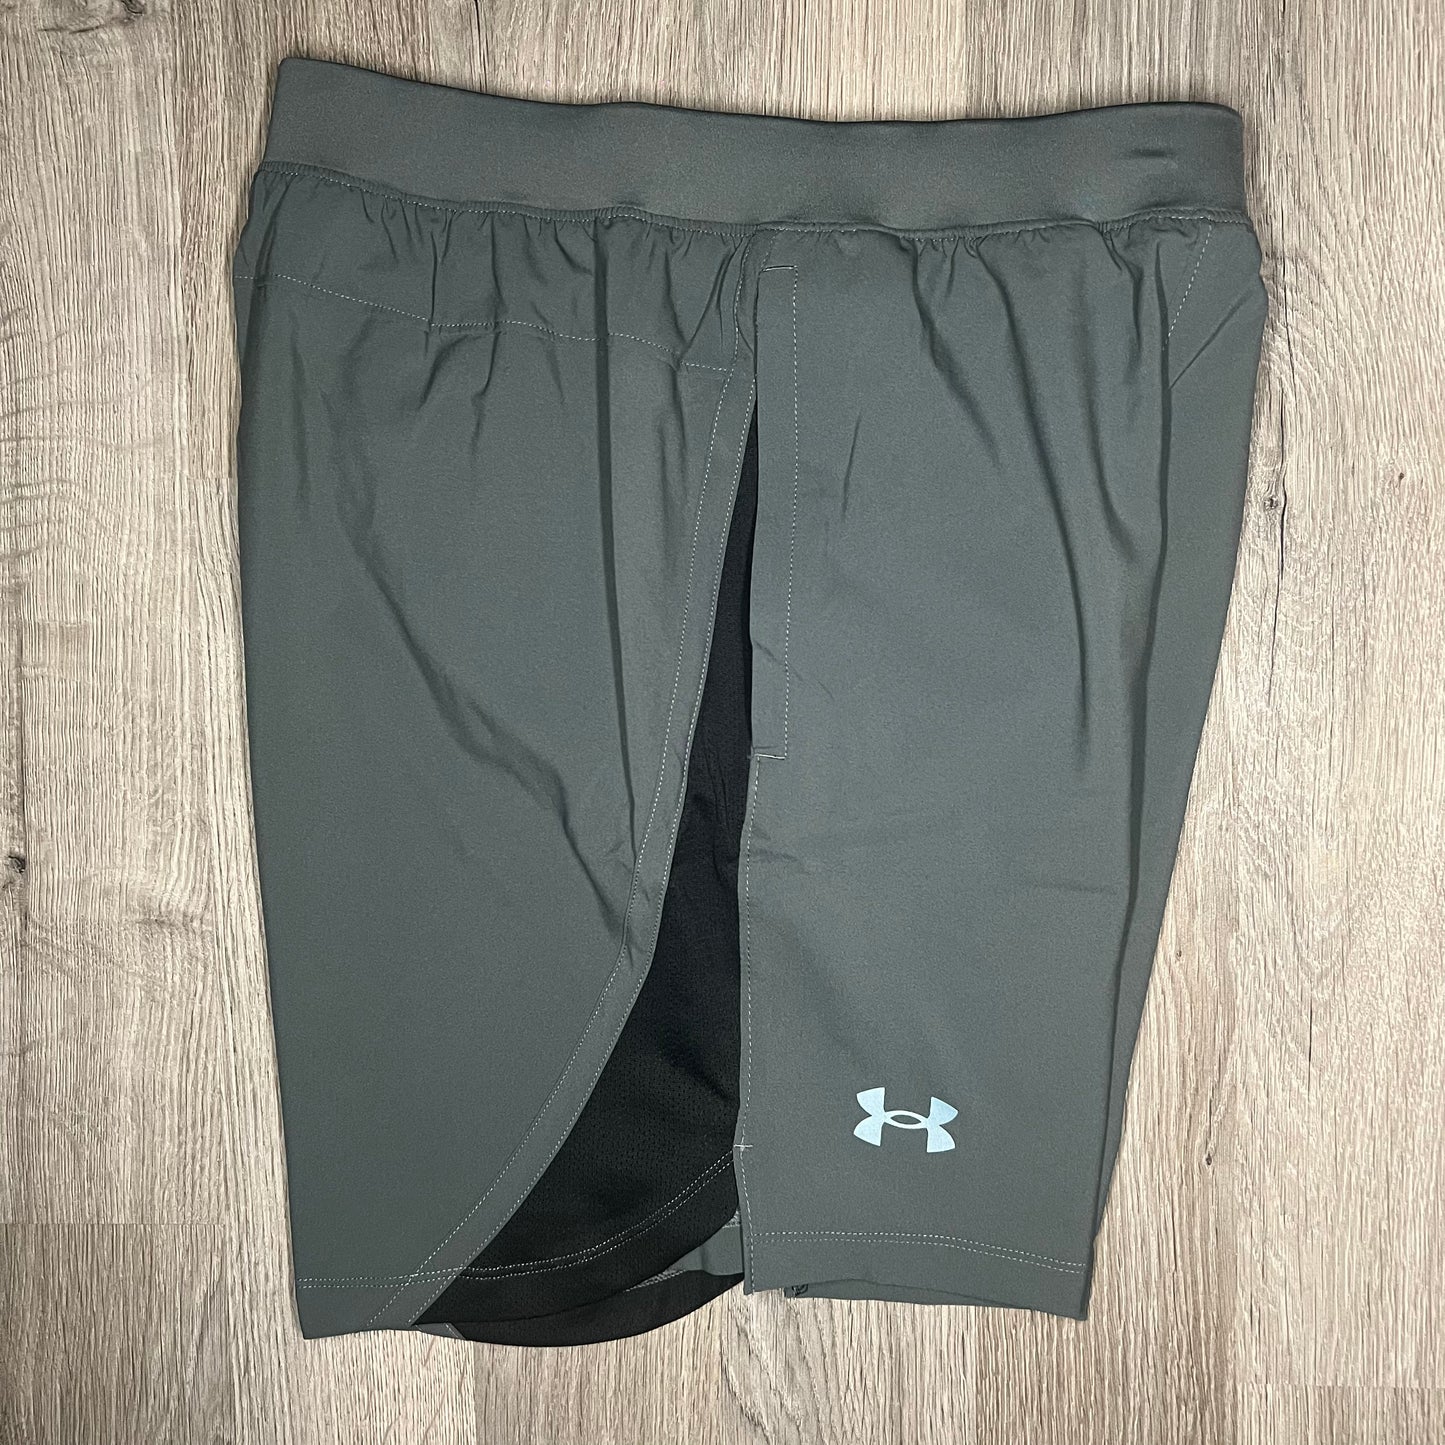 Under Armour Launch Shorts - Grey / Black